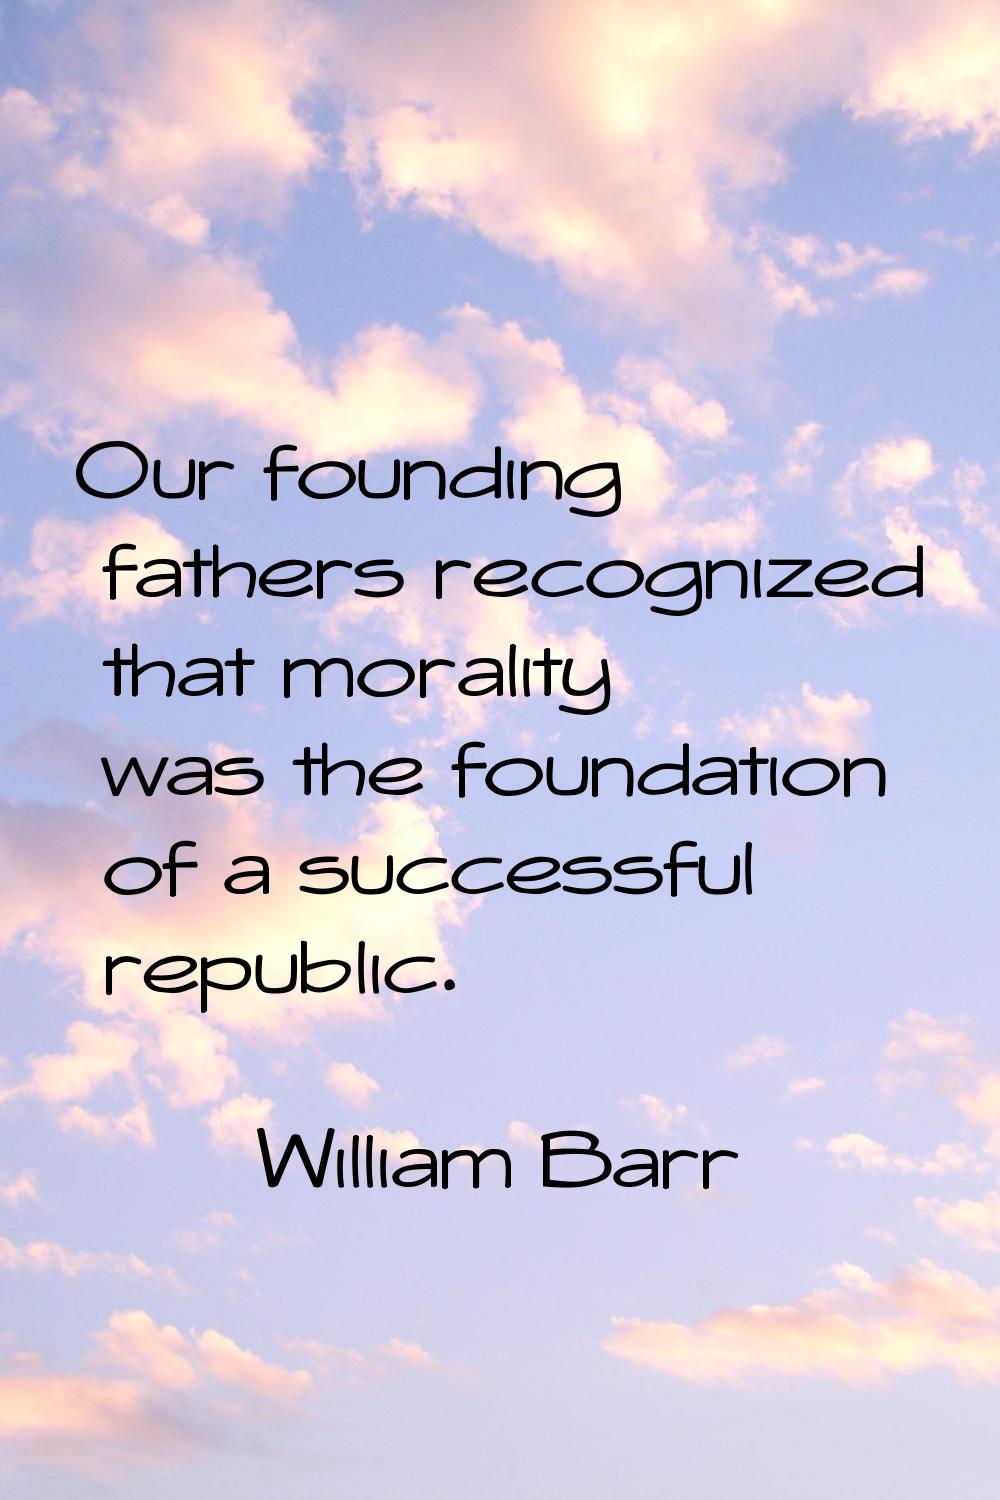 Our founding fathers recognized that morality was the foundation of a successful republic.